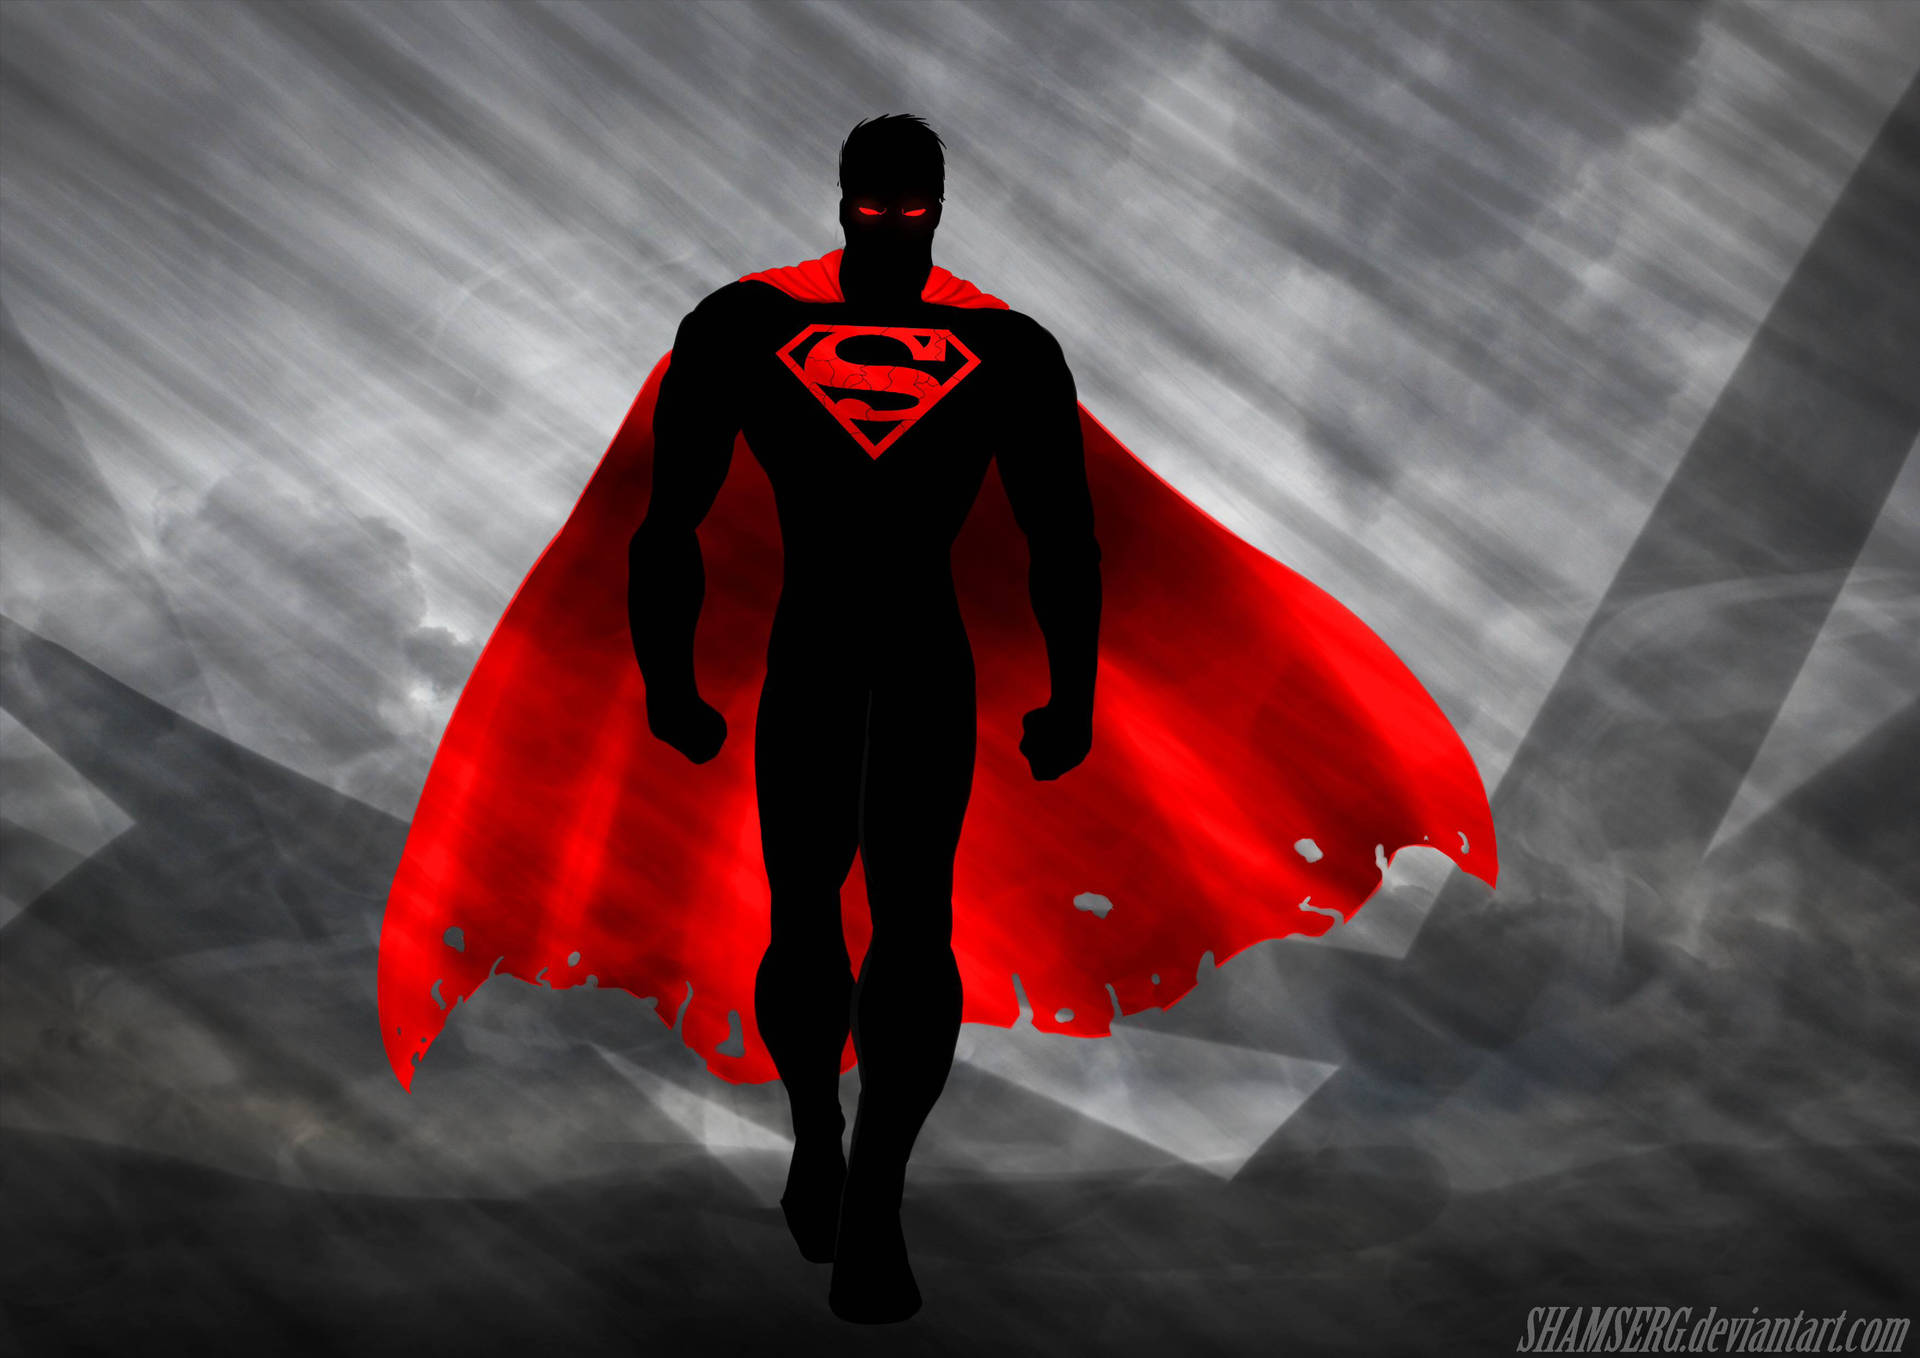 The Iconic Superman Ready for Action Wallpaper